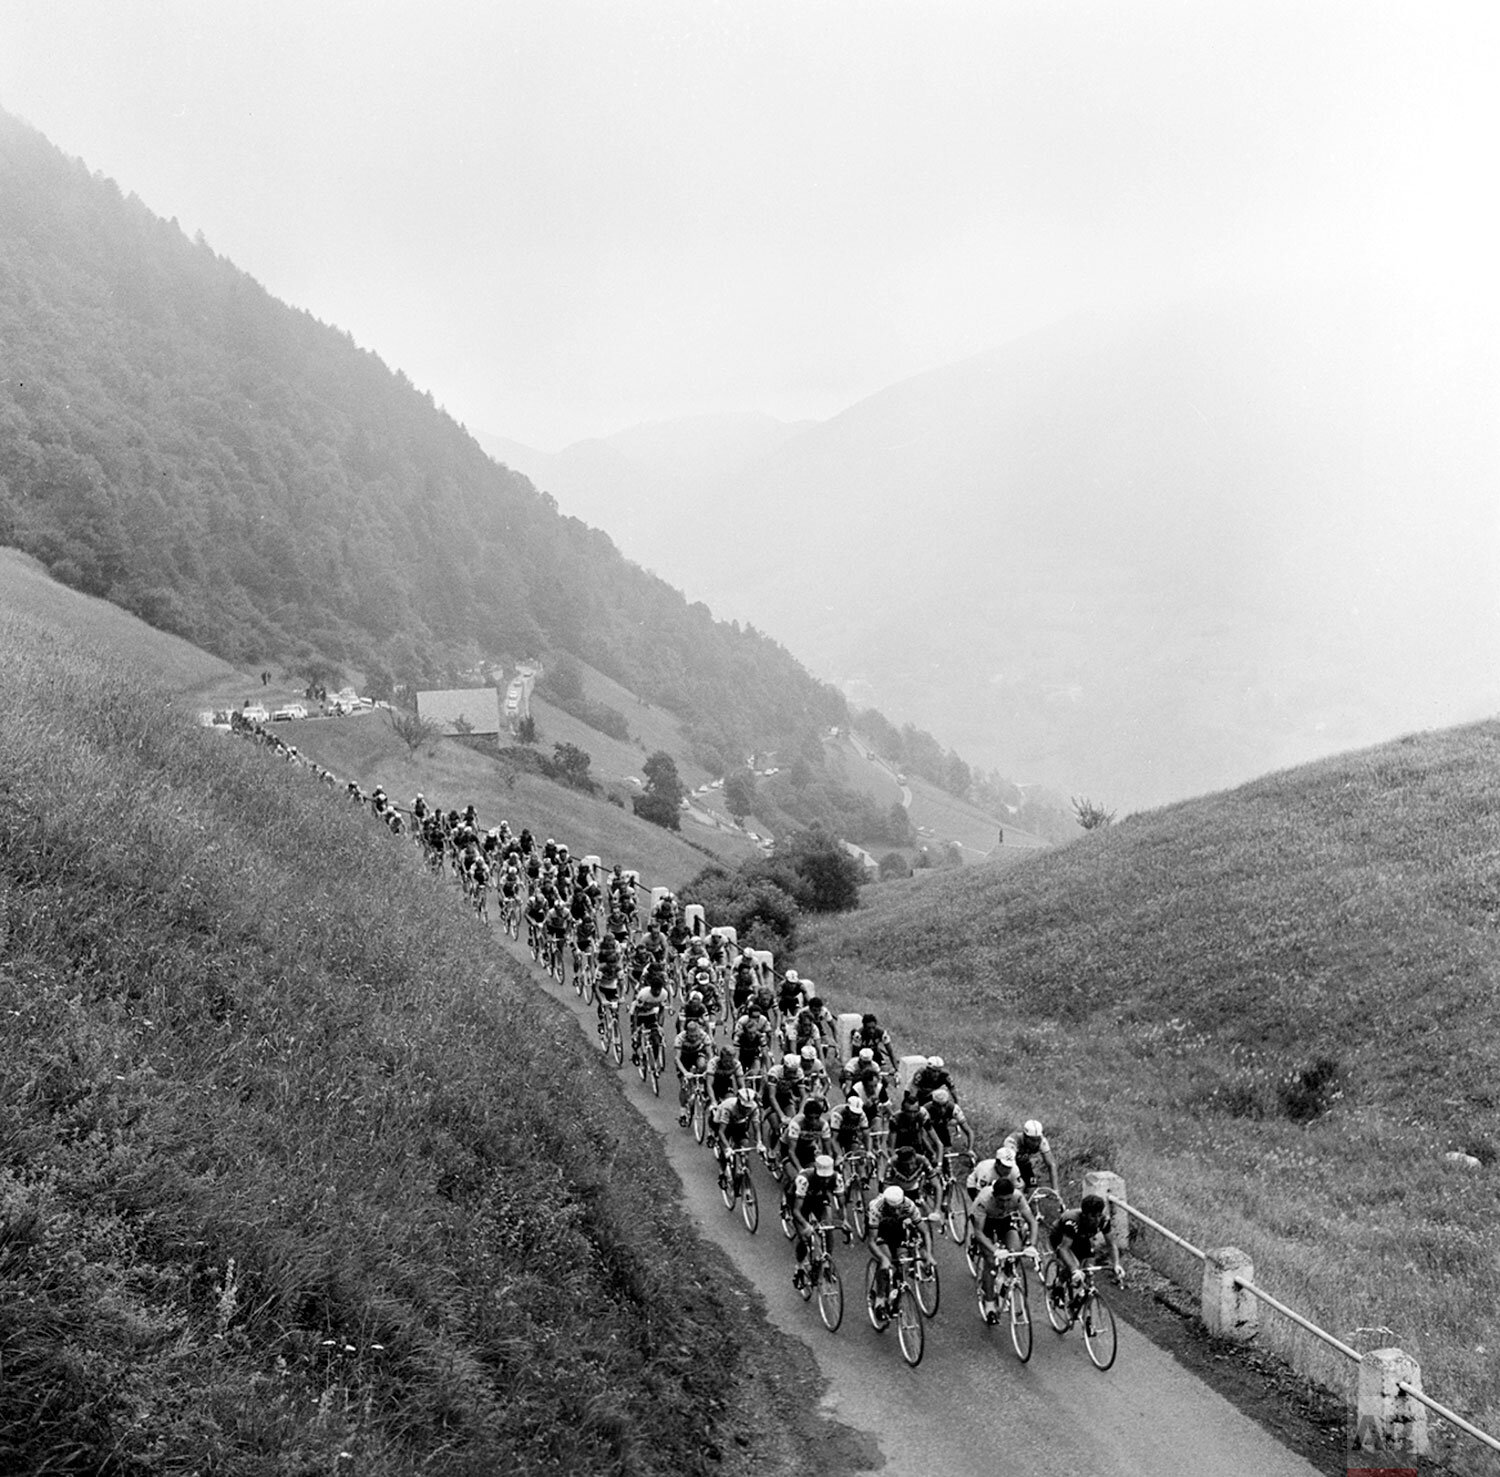  Contestants in the grueling Tour de France are seen on their way to the Mente Pass in the Pyrenees Mountains, at La Mongie, France, on the 18th leg of the race July 14, 1970. (AP Photo) 